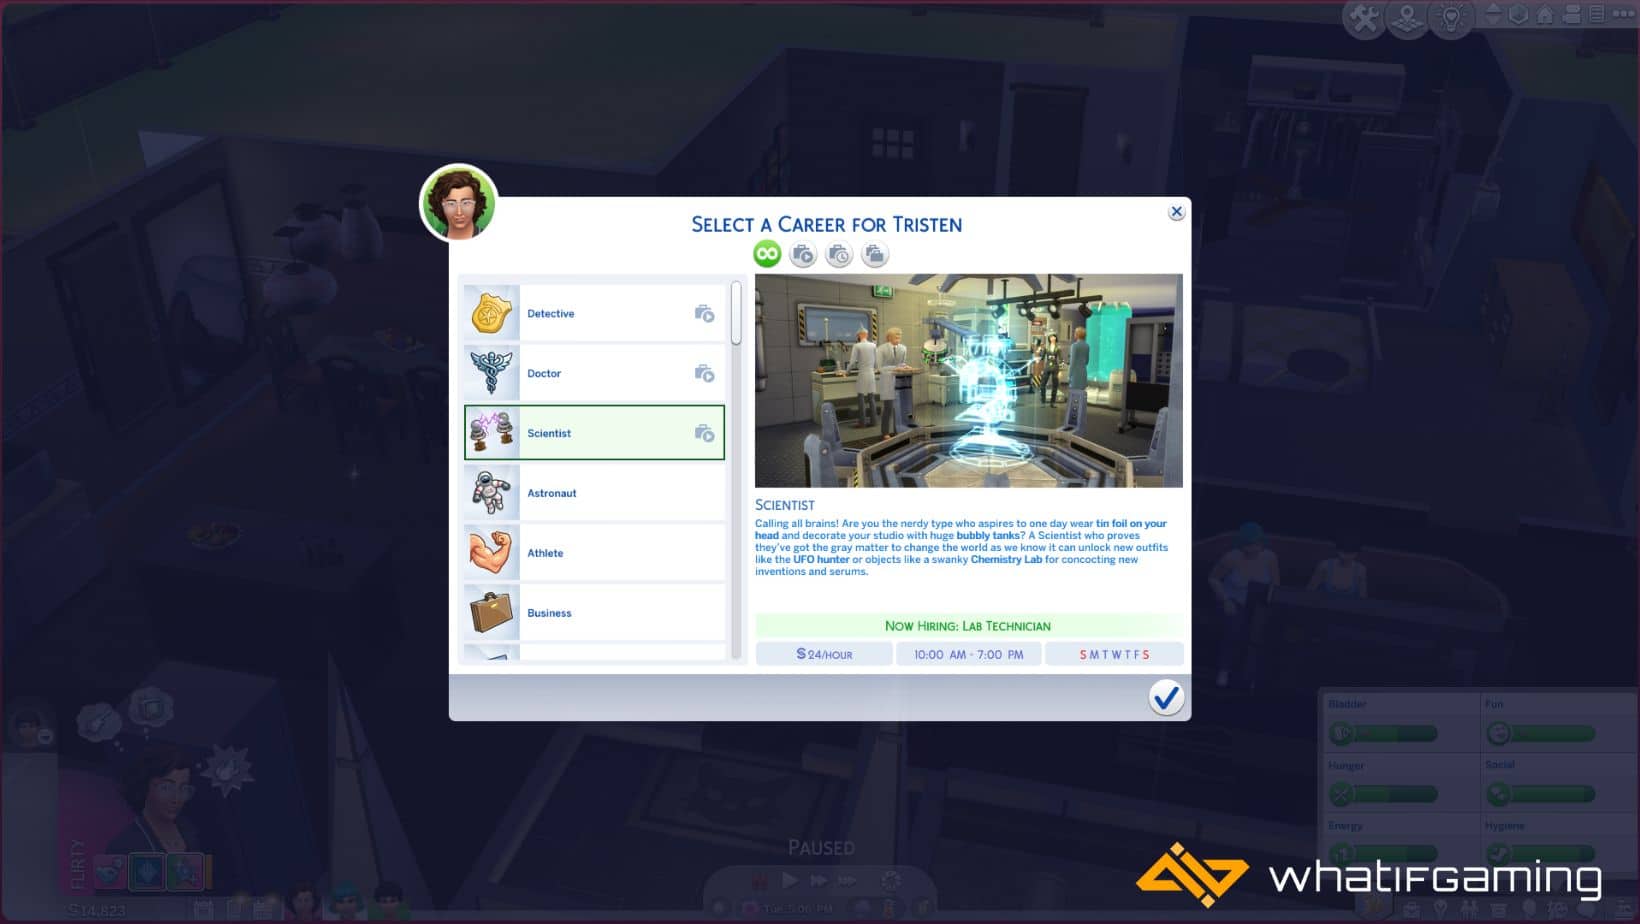 Choosing the Scientist career will allow your sim to have a higher chance of abduction.